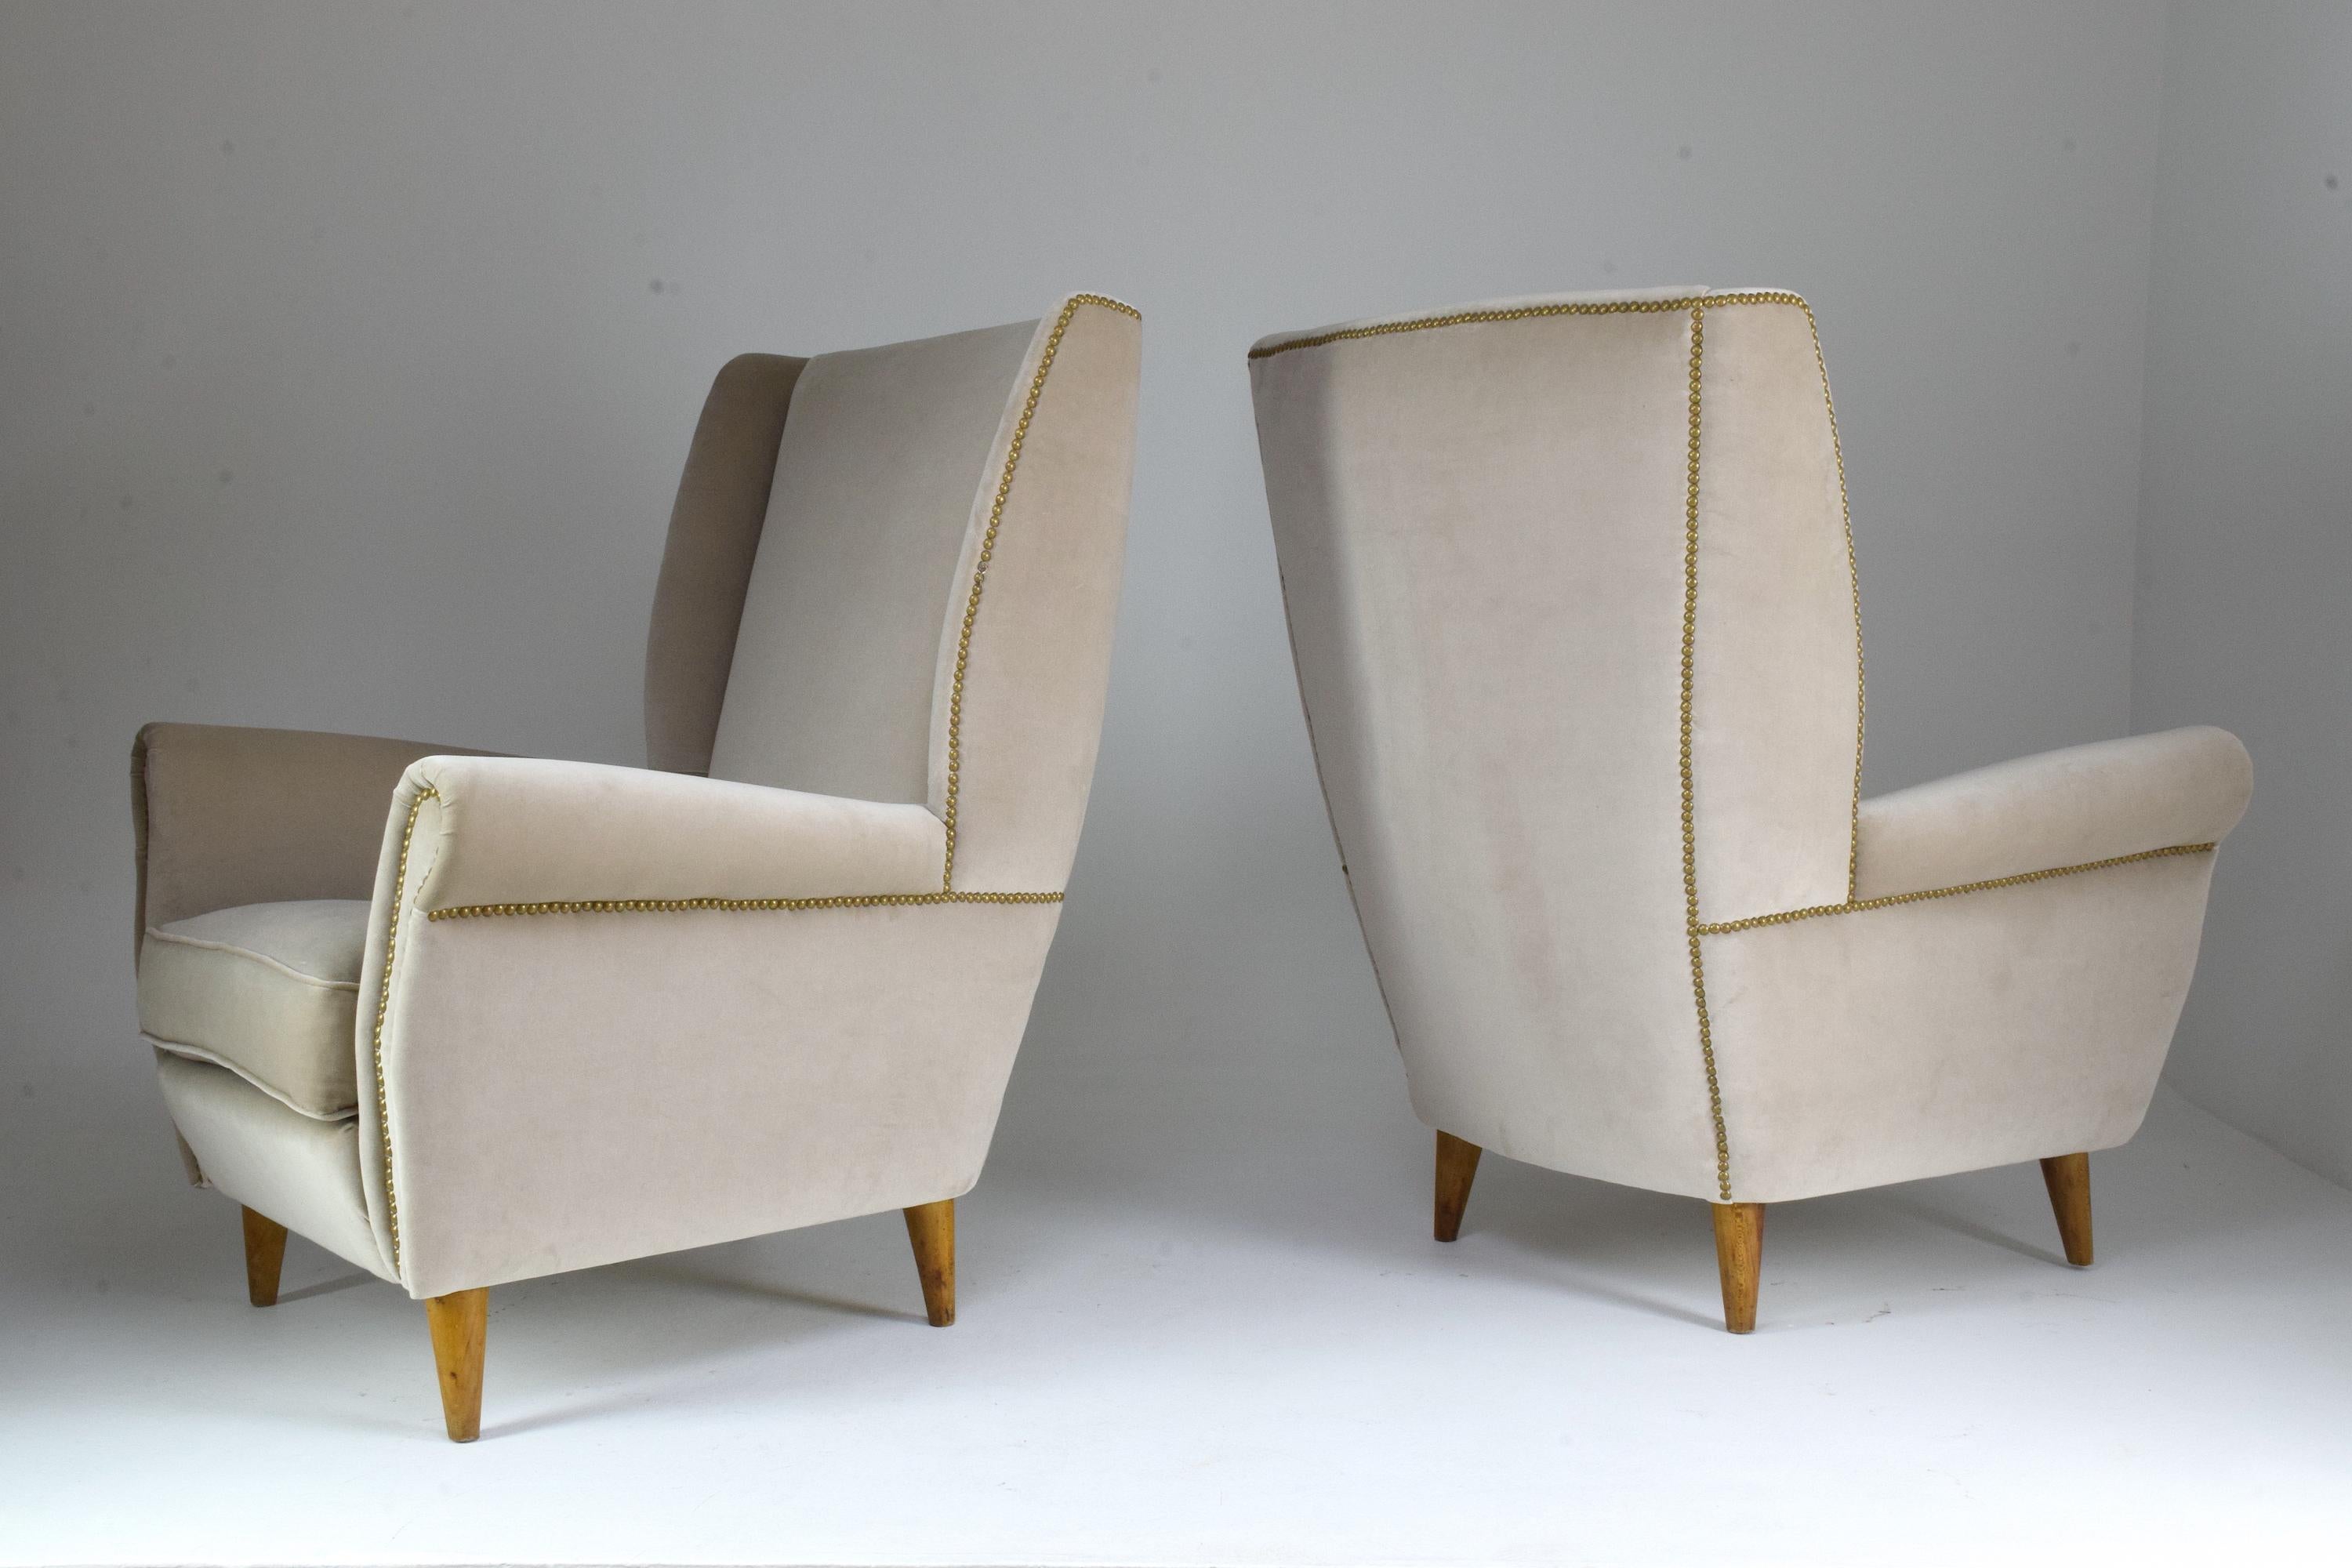 Pair of 20th Century Armchairs In the Style of Gio Ponti, 1940s For Sale 9